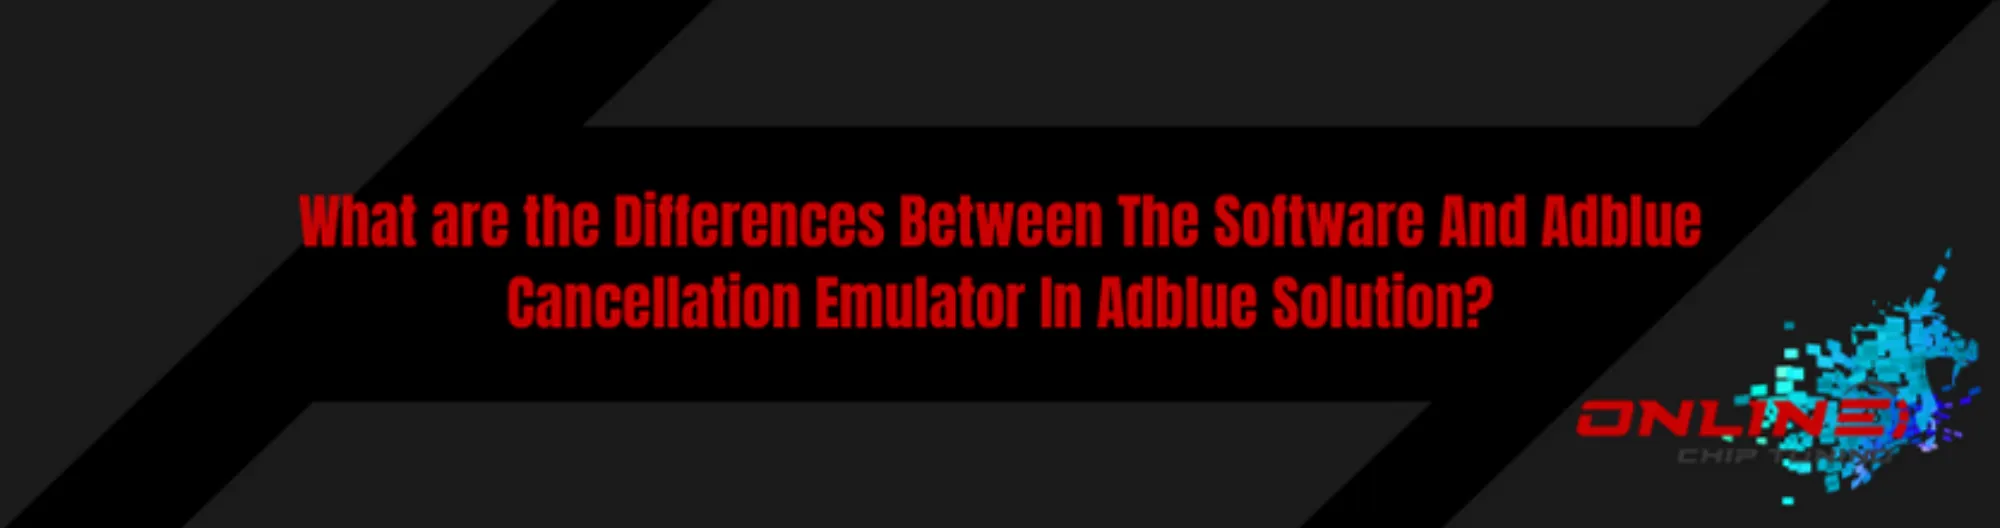 What are the Differences Between The Software And Adblue Cancellation Emulator In Adblue Solution?